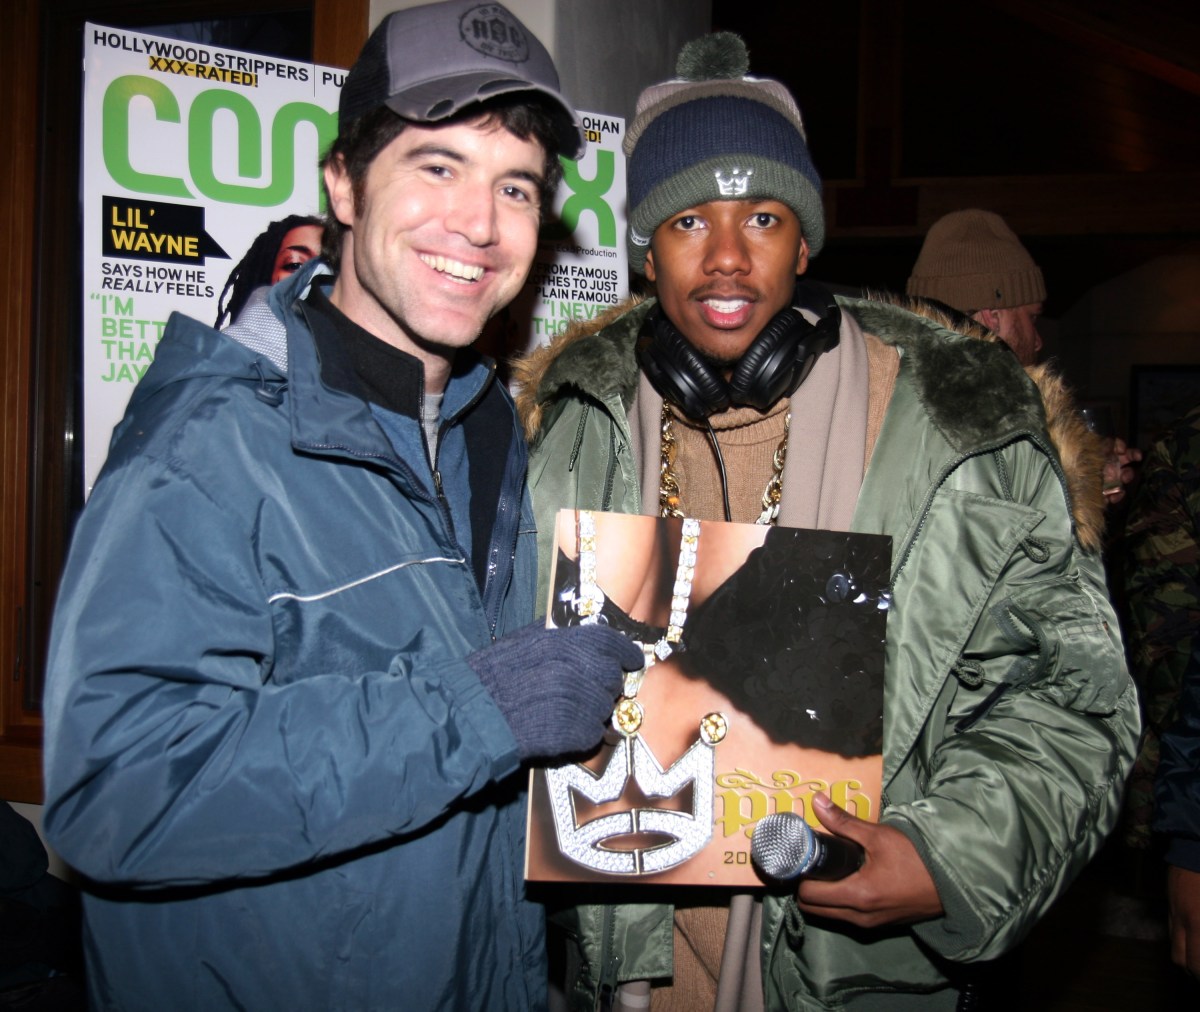 Tom from Myspace posing with Nick Cannon